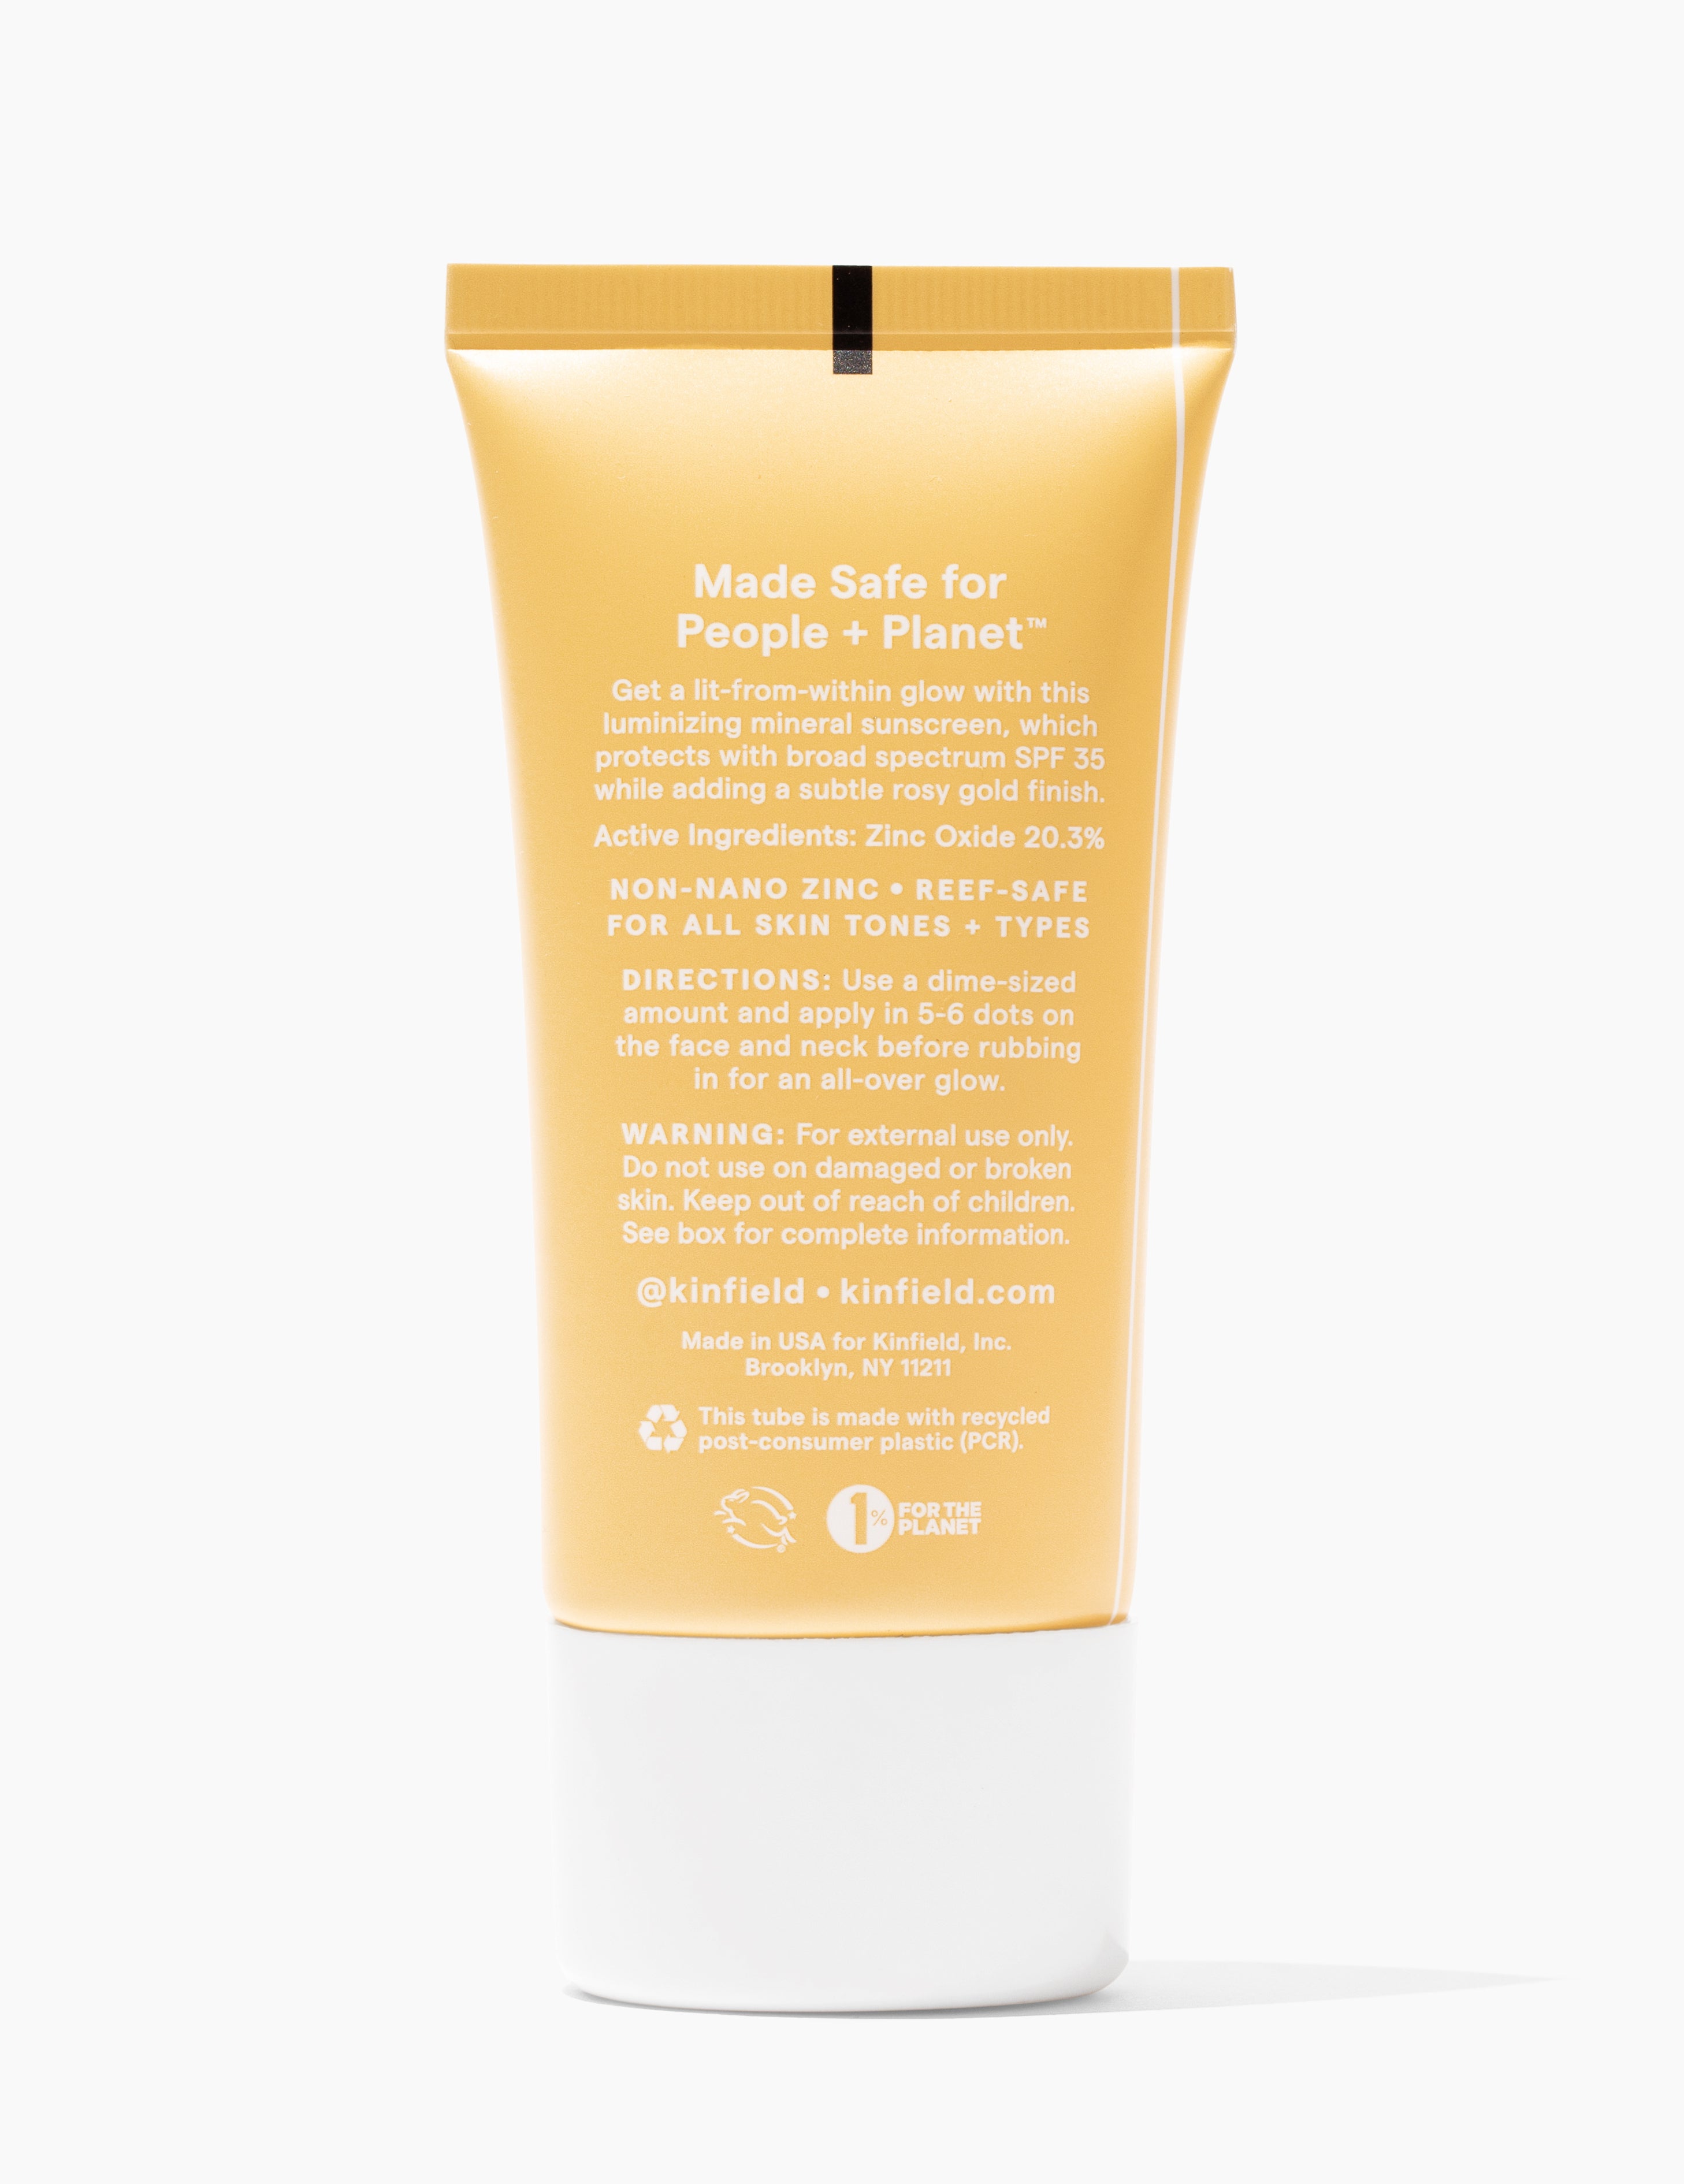 Sunglow SPF 35 Luminizing Tinted Mineral Sunscreen